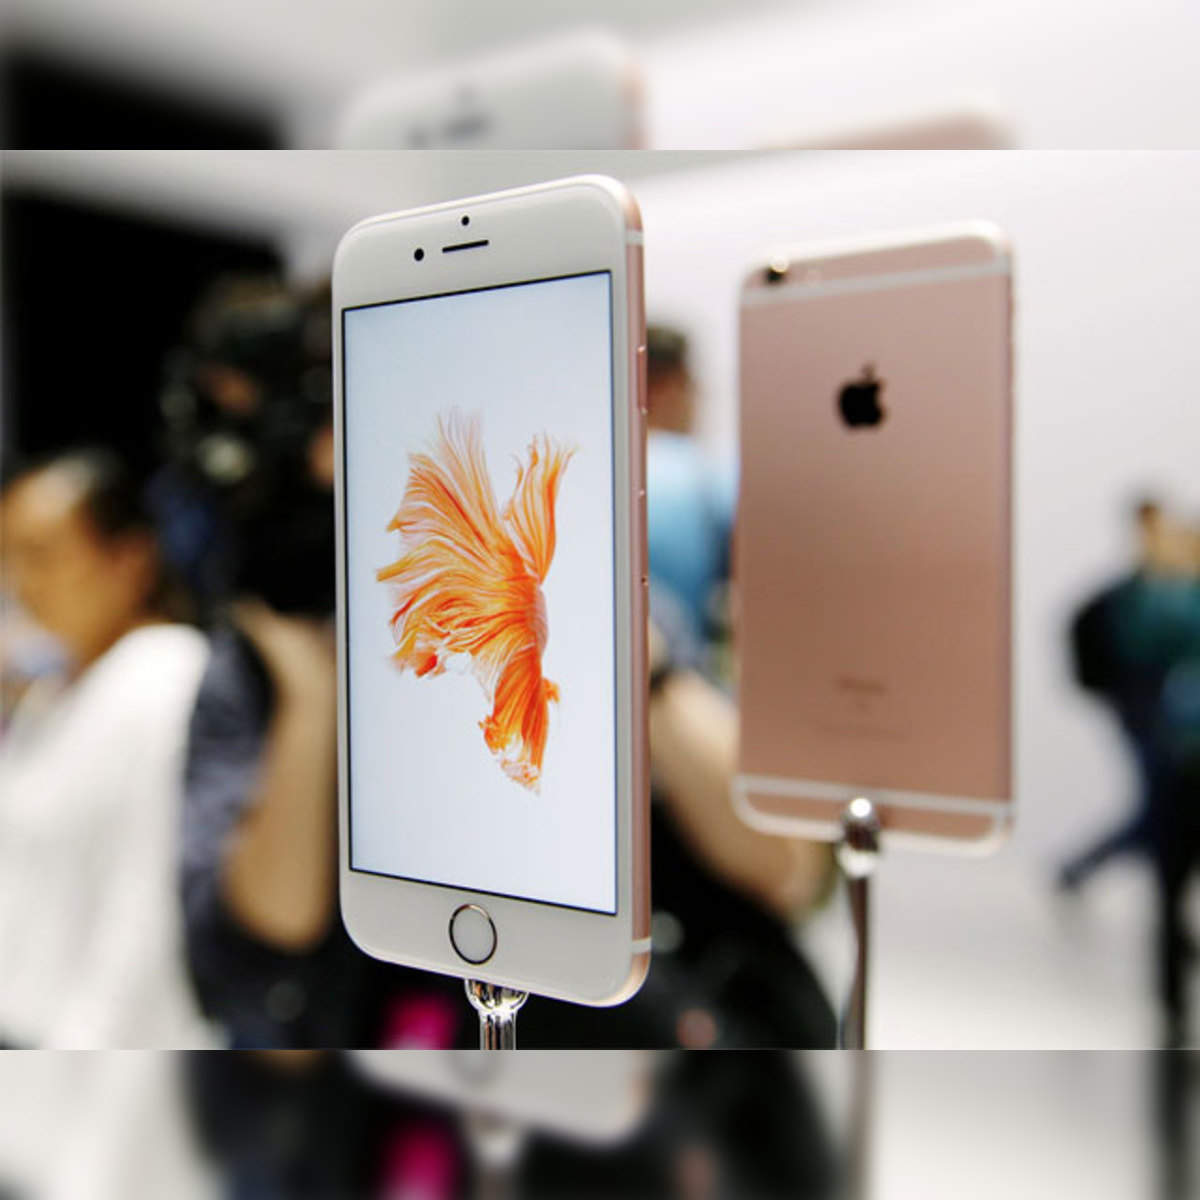 Apple iPhone 6s and 6s Plus review: Blazing fast performance - The